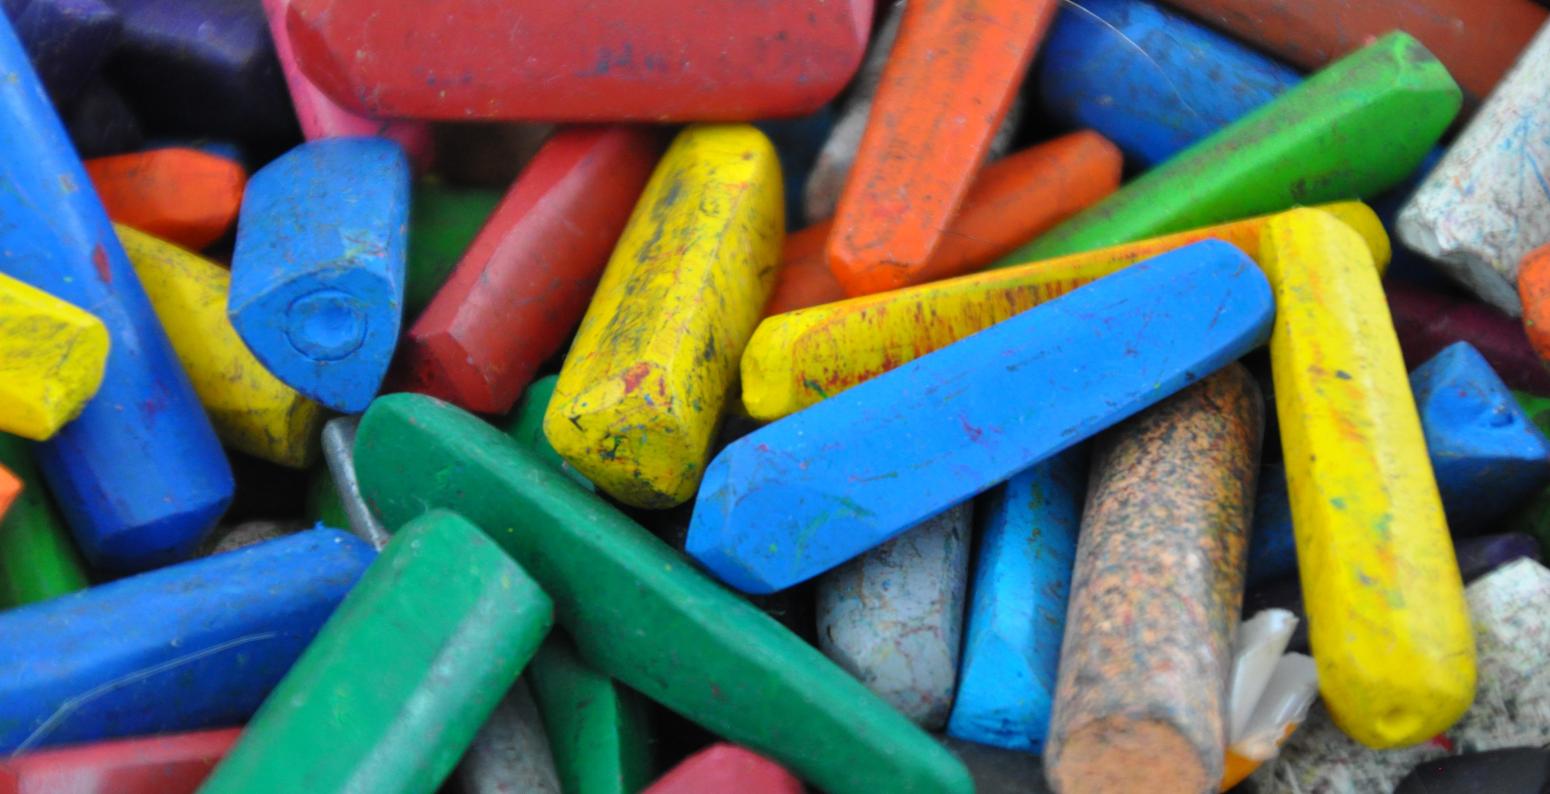 A colorful pile of small, used crayons.